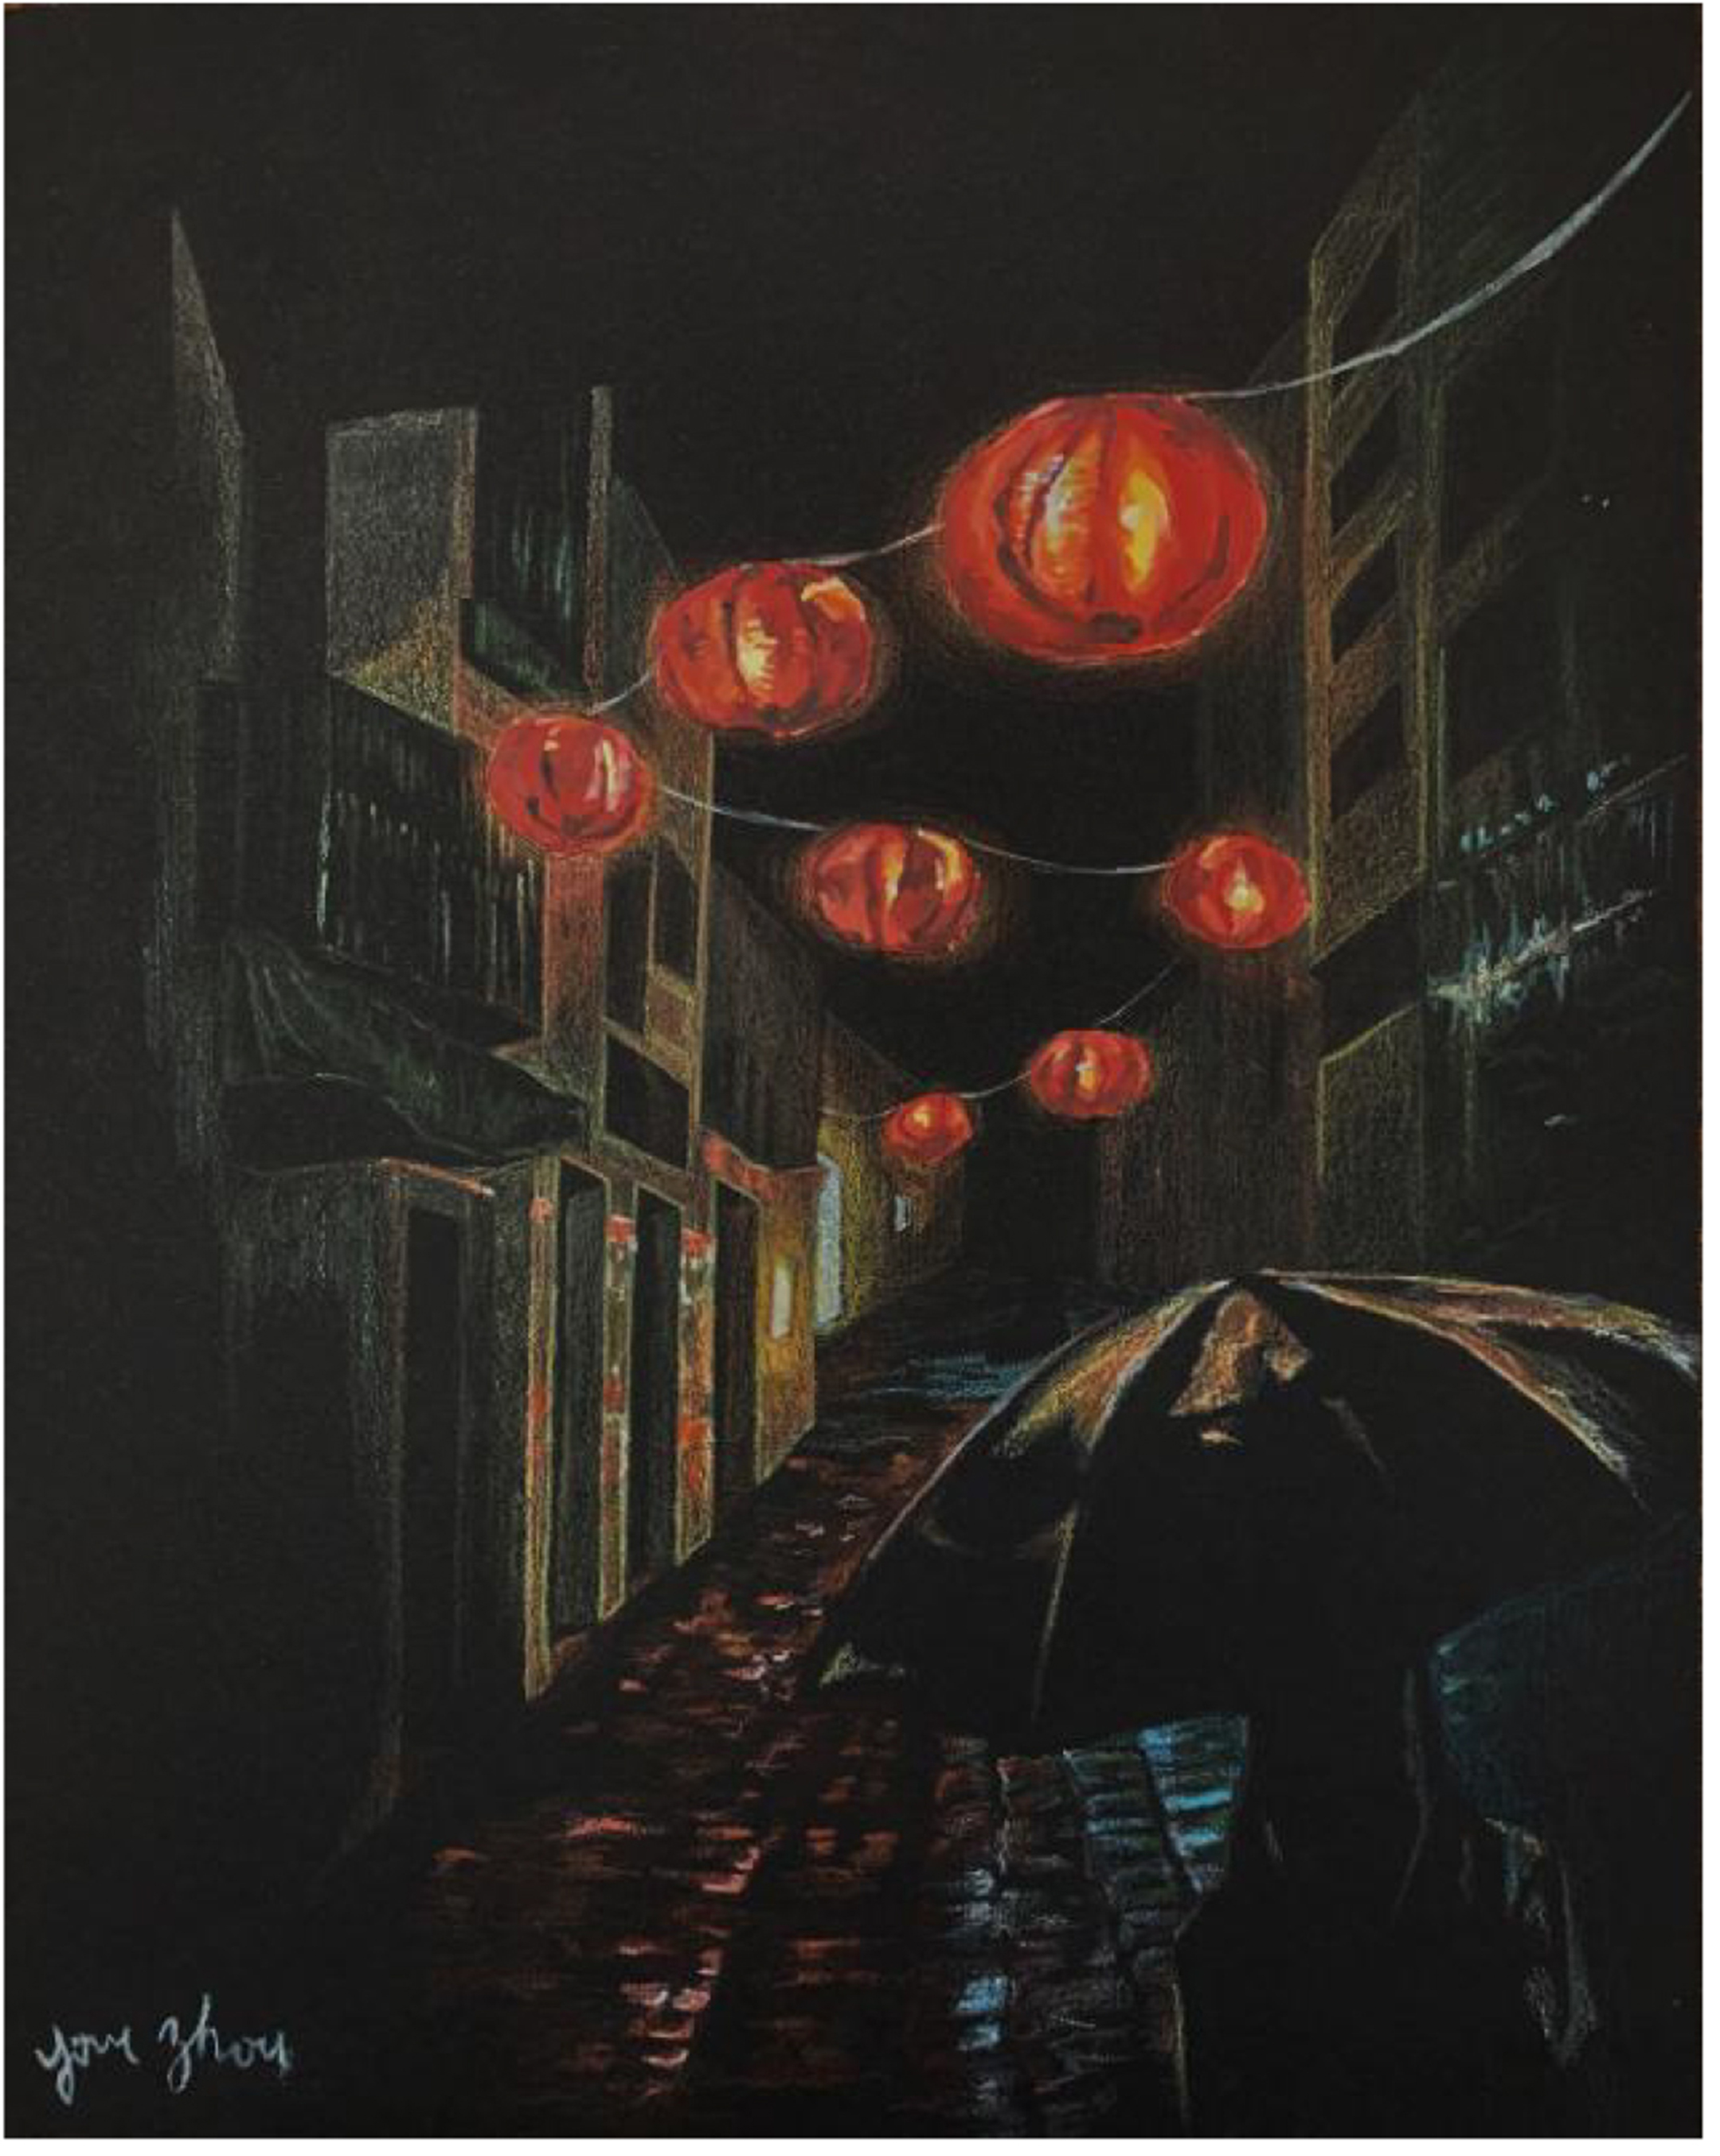 Illustration of a rainy night scene, red paper lanterns above illuminating a person walking with an umbrella down the street